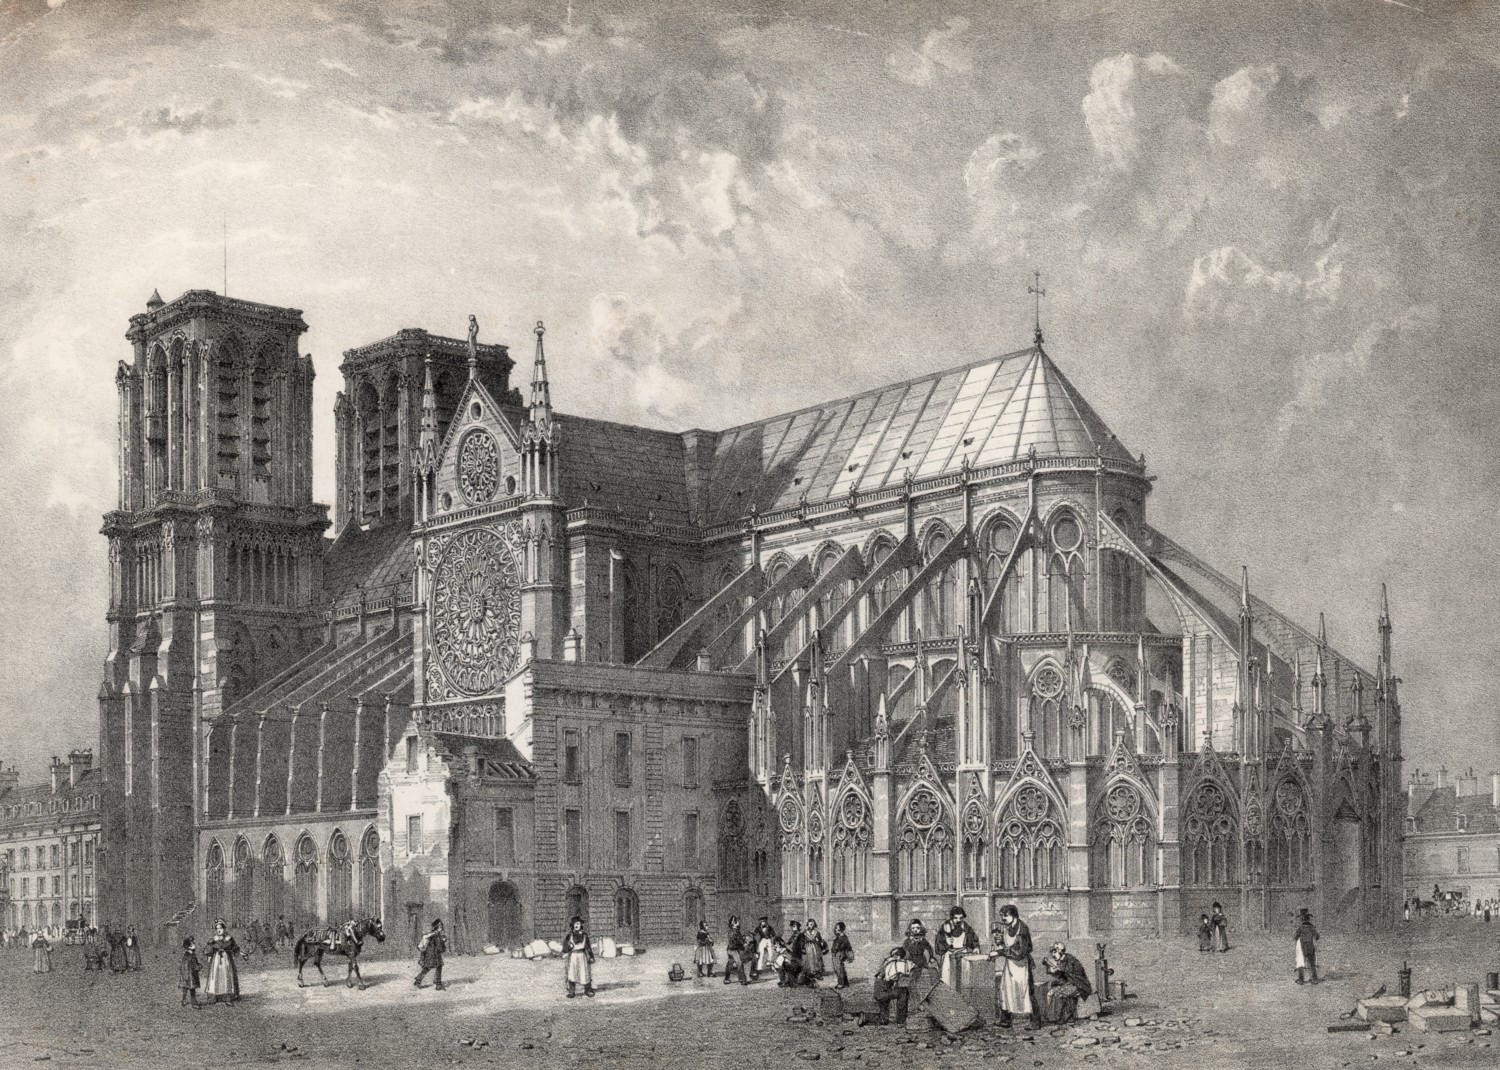 Notre Dame Was The Site Of Napoleon’s Coronation.